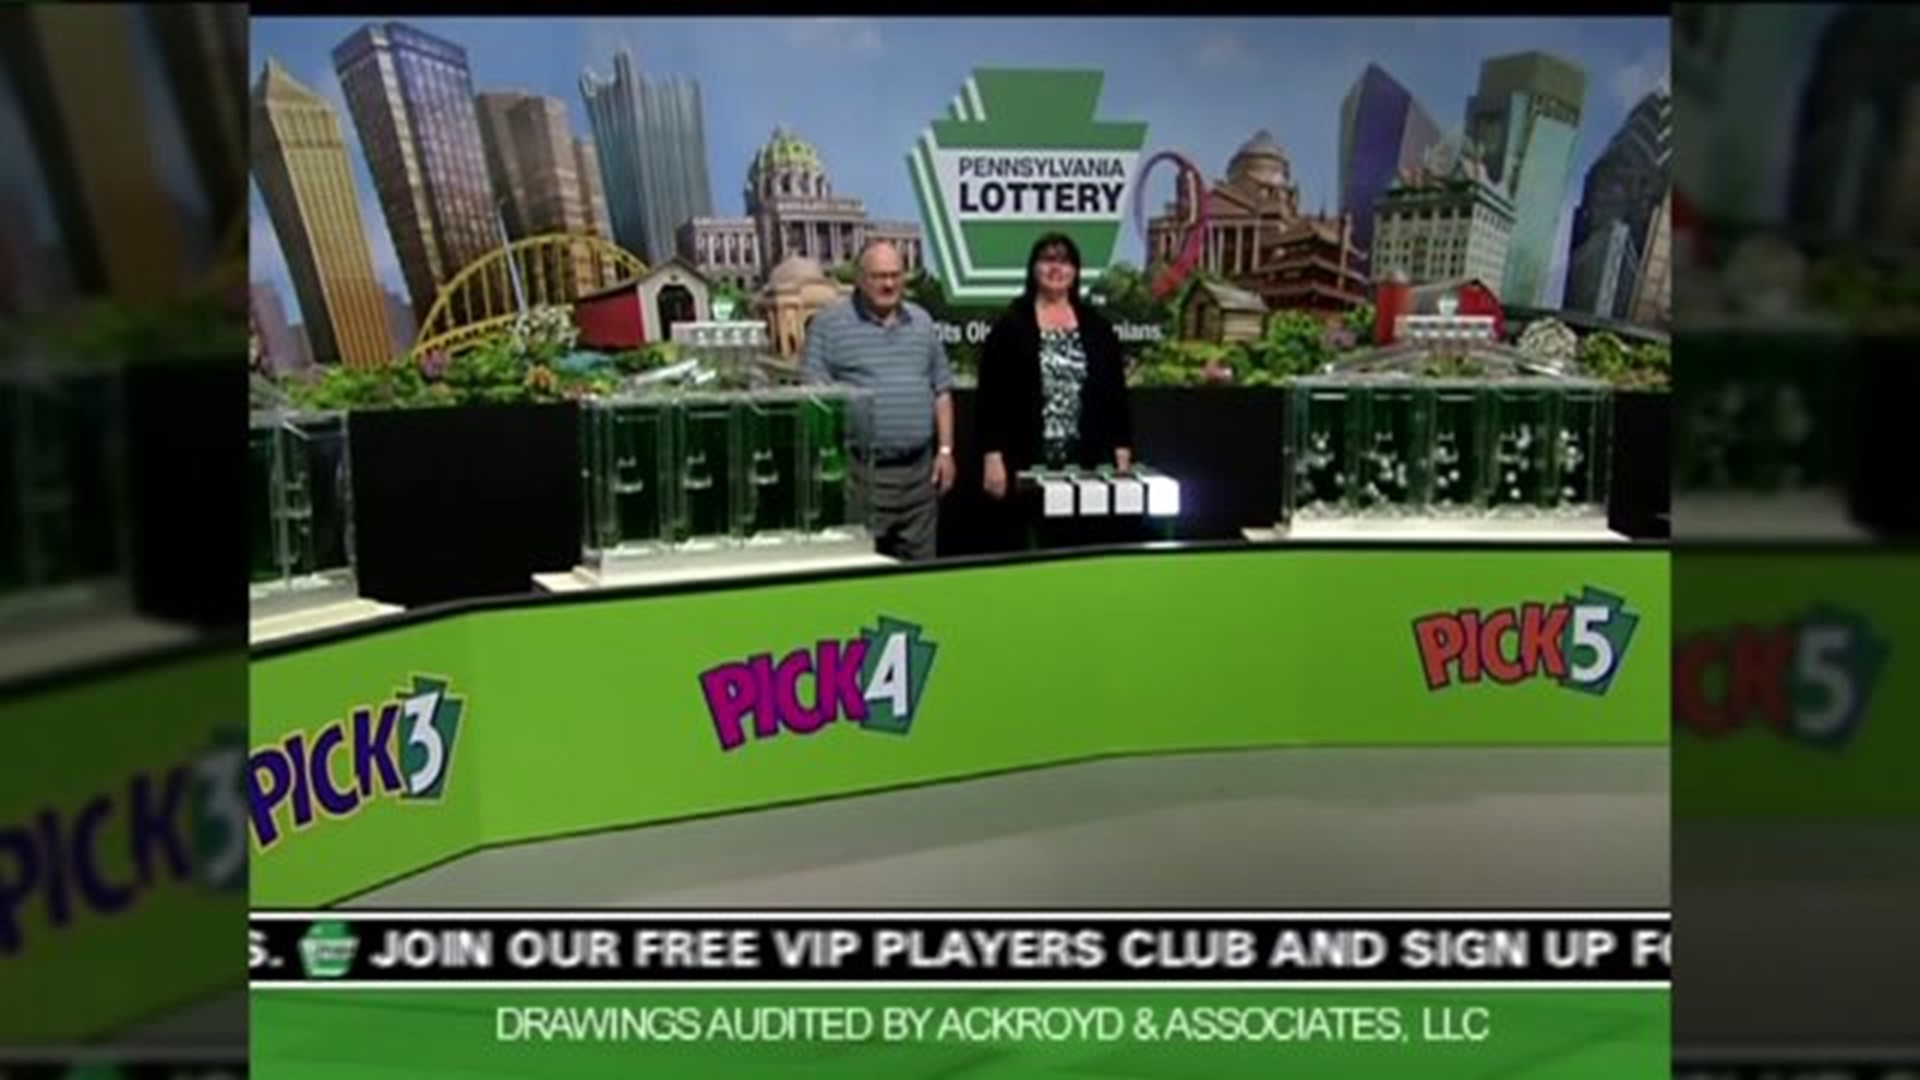 Volunteers Wanted For PA Lottery Drawings